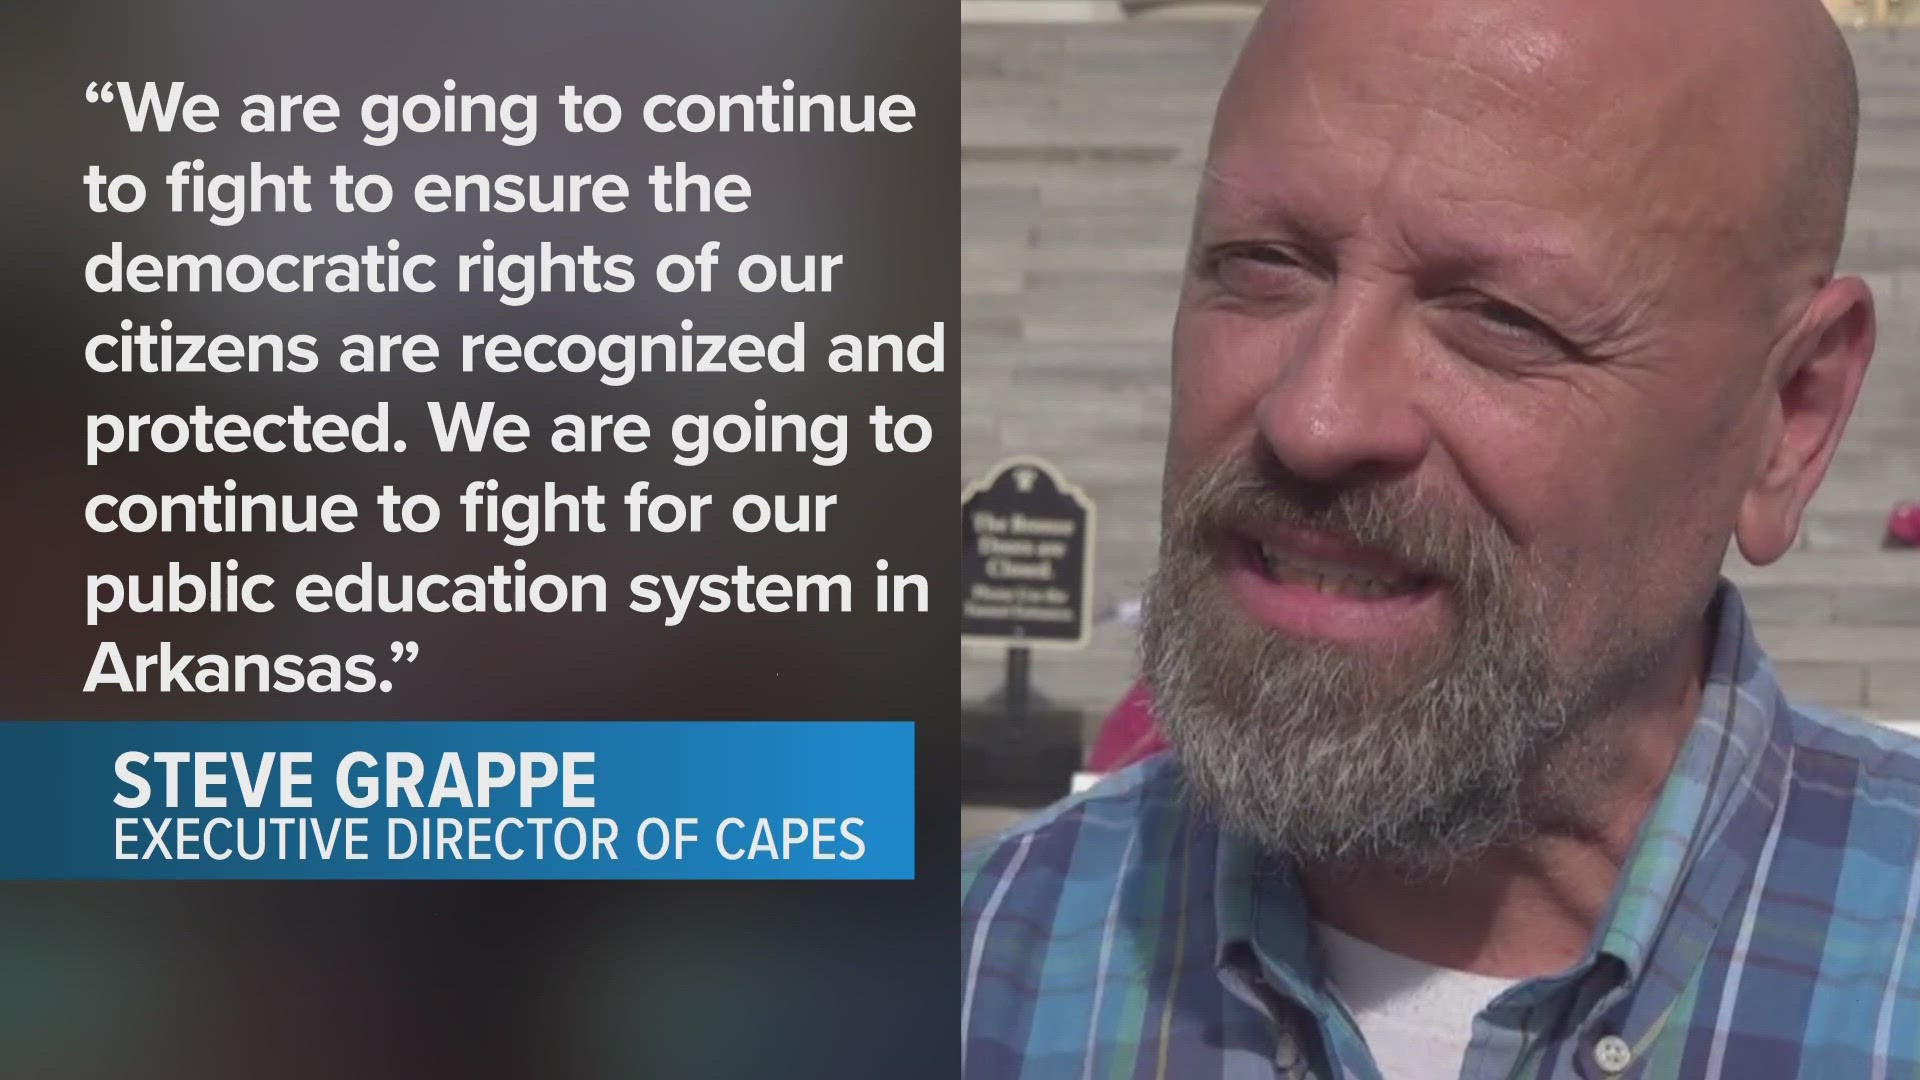 The petition brought upon by CAPES aimed against the Arkansas LEARNS Act was deemed "invalid" after it was confirmed to be less than 1,000 signatures short.